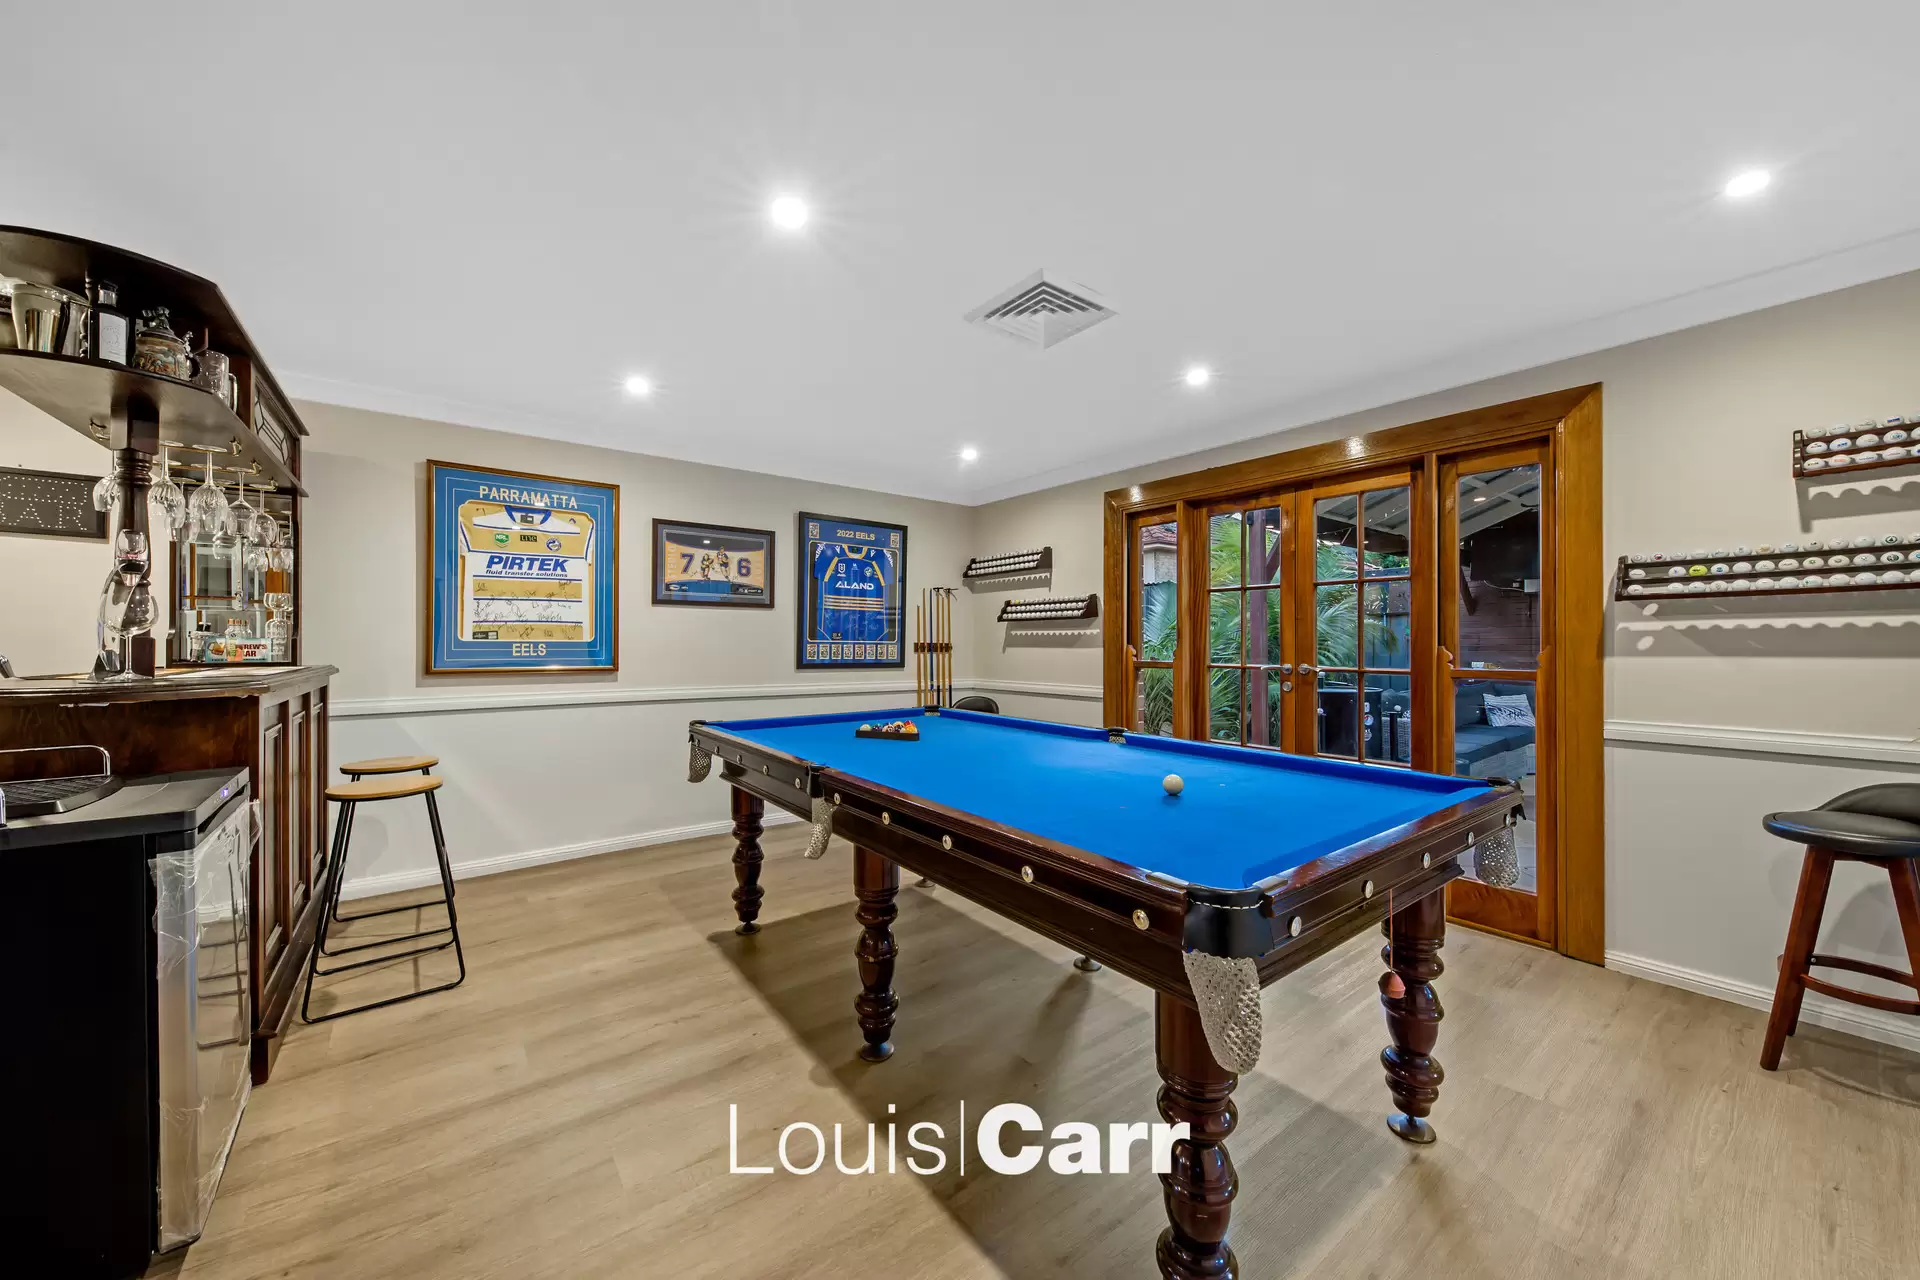 Photo #9: 4 Rooke Court, Kellyville - Sold by Louis Carr Real Estate